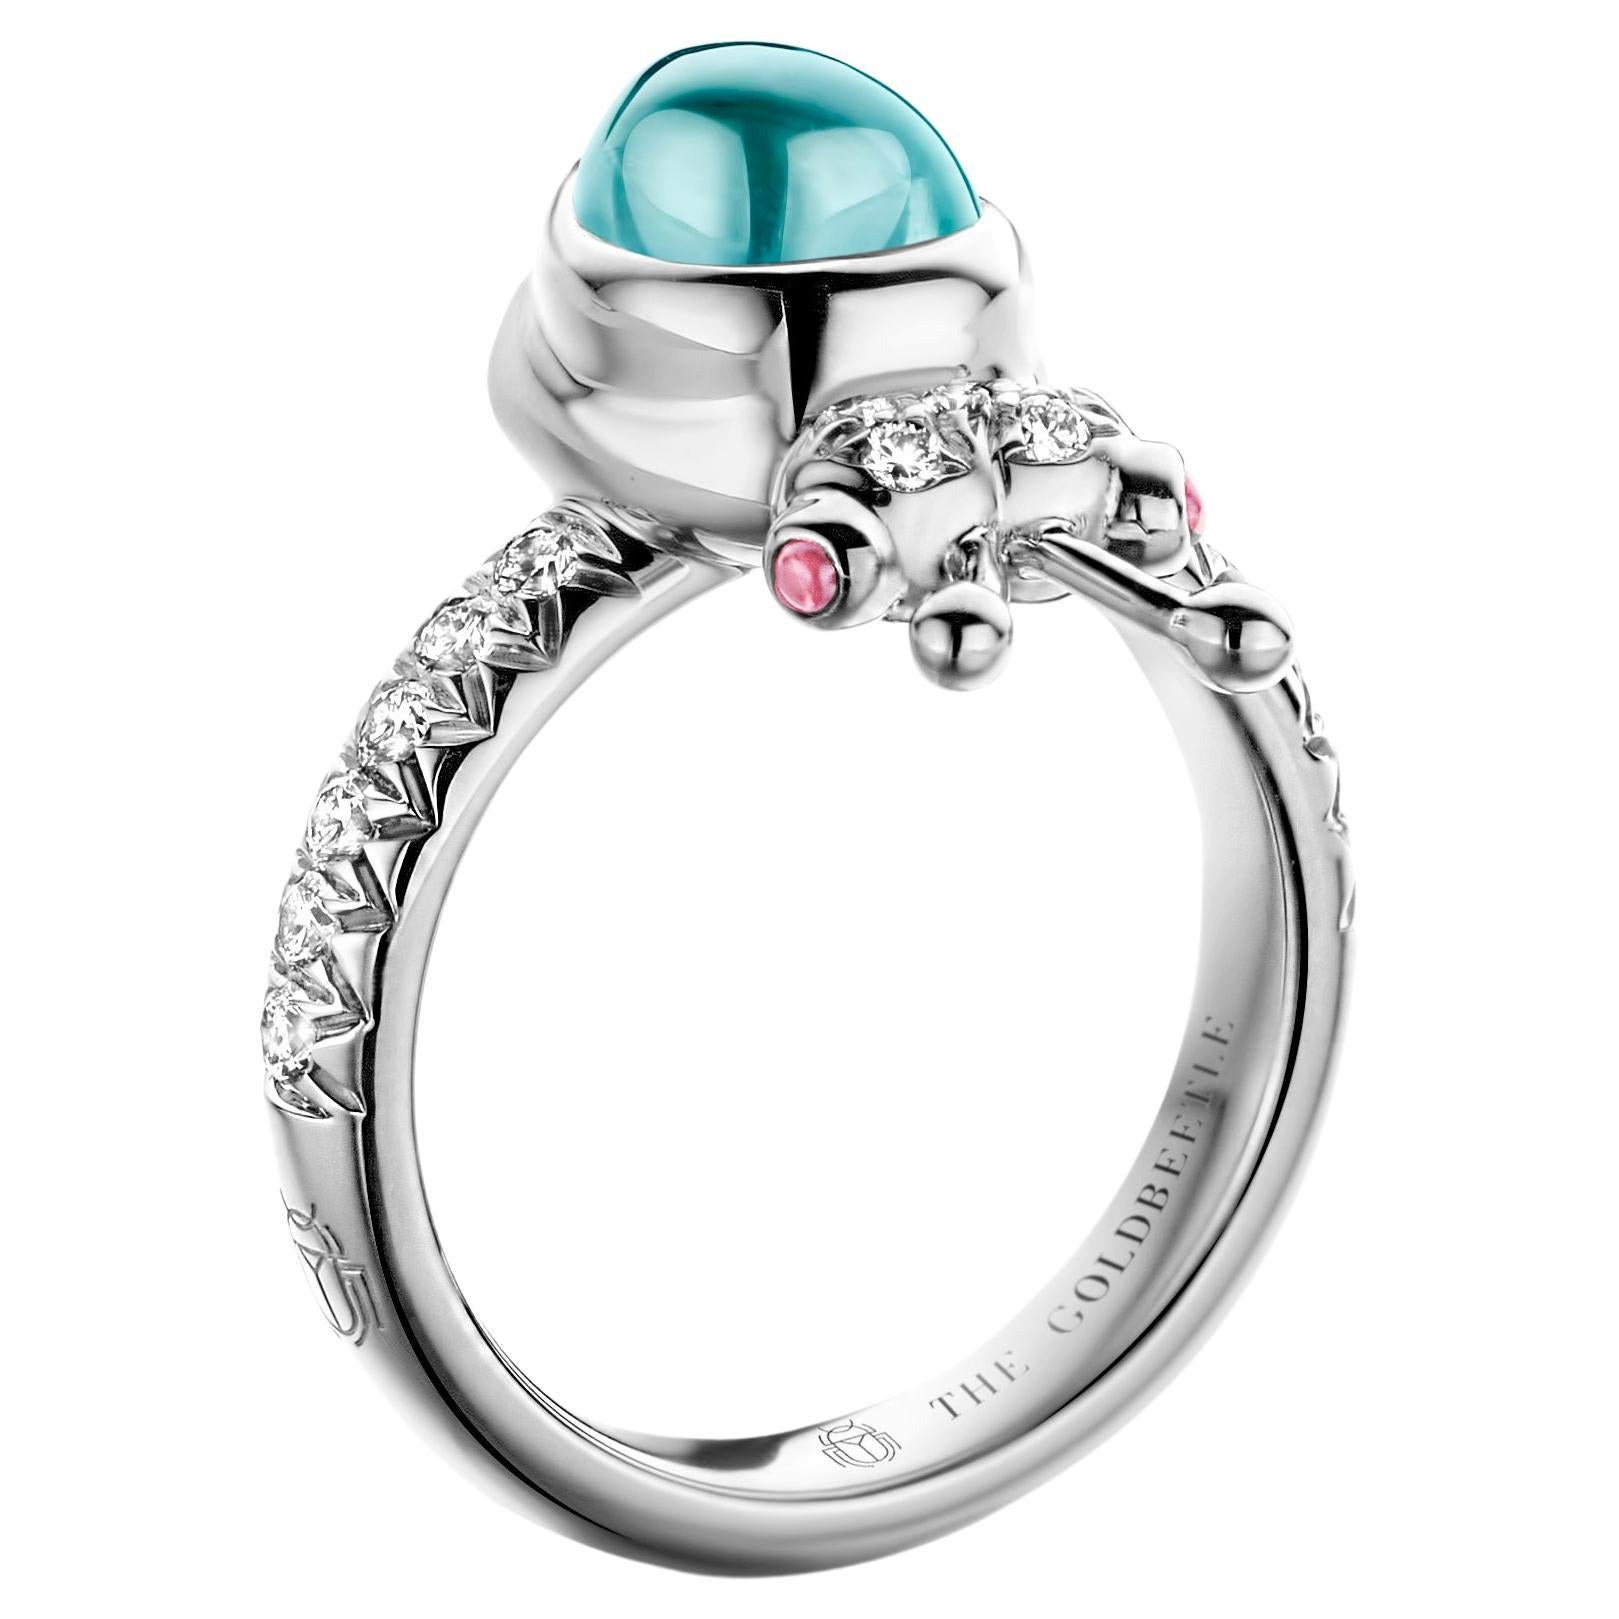 One-of-a-kind lucky beetle ring in 18-Karat white gold 8,6 g set with the finest diamonds in brilliant cut 0,34 Carat (VVS/DEF quality) one natural, aquamarine in pear cabochon cut and two pink tourmalines in round cabochon cut.
